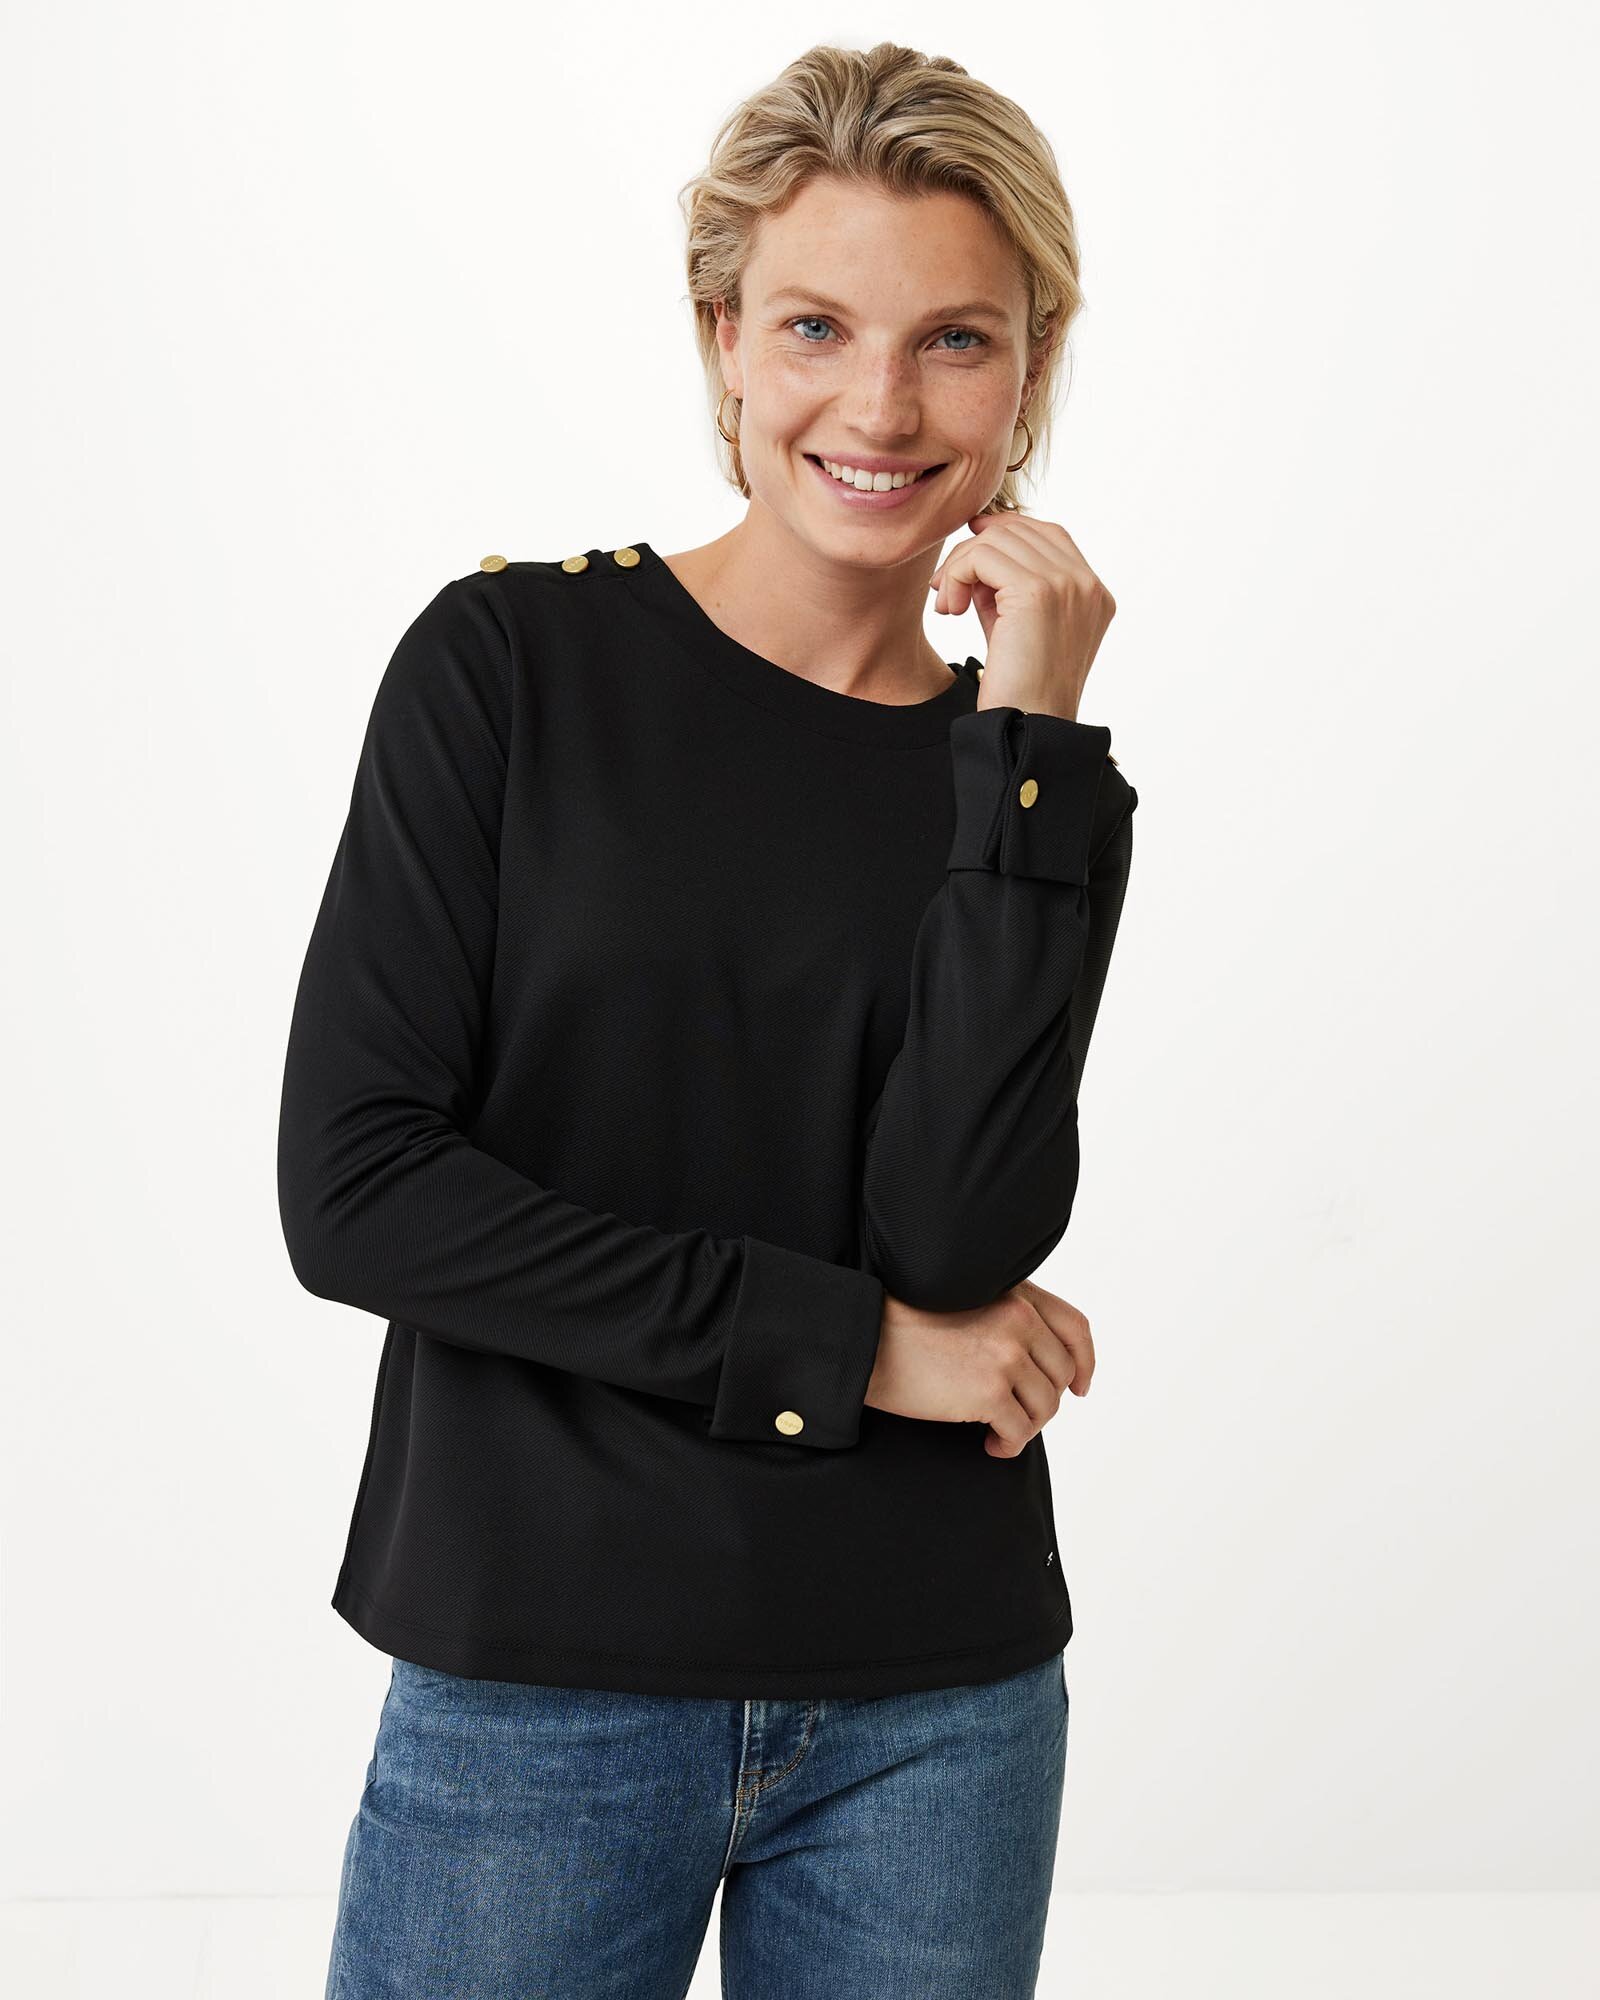 Longsleeve top with buttons on shoulders Black